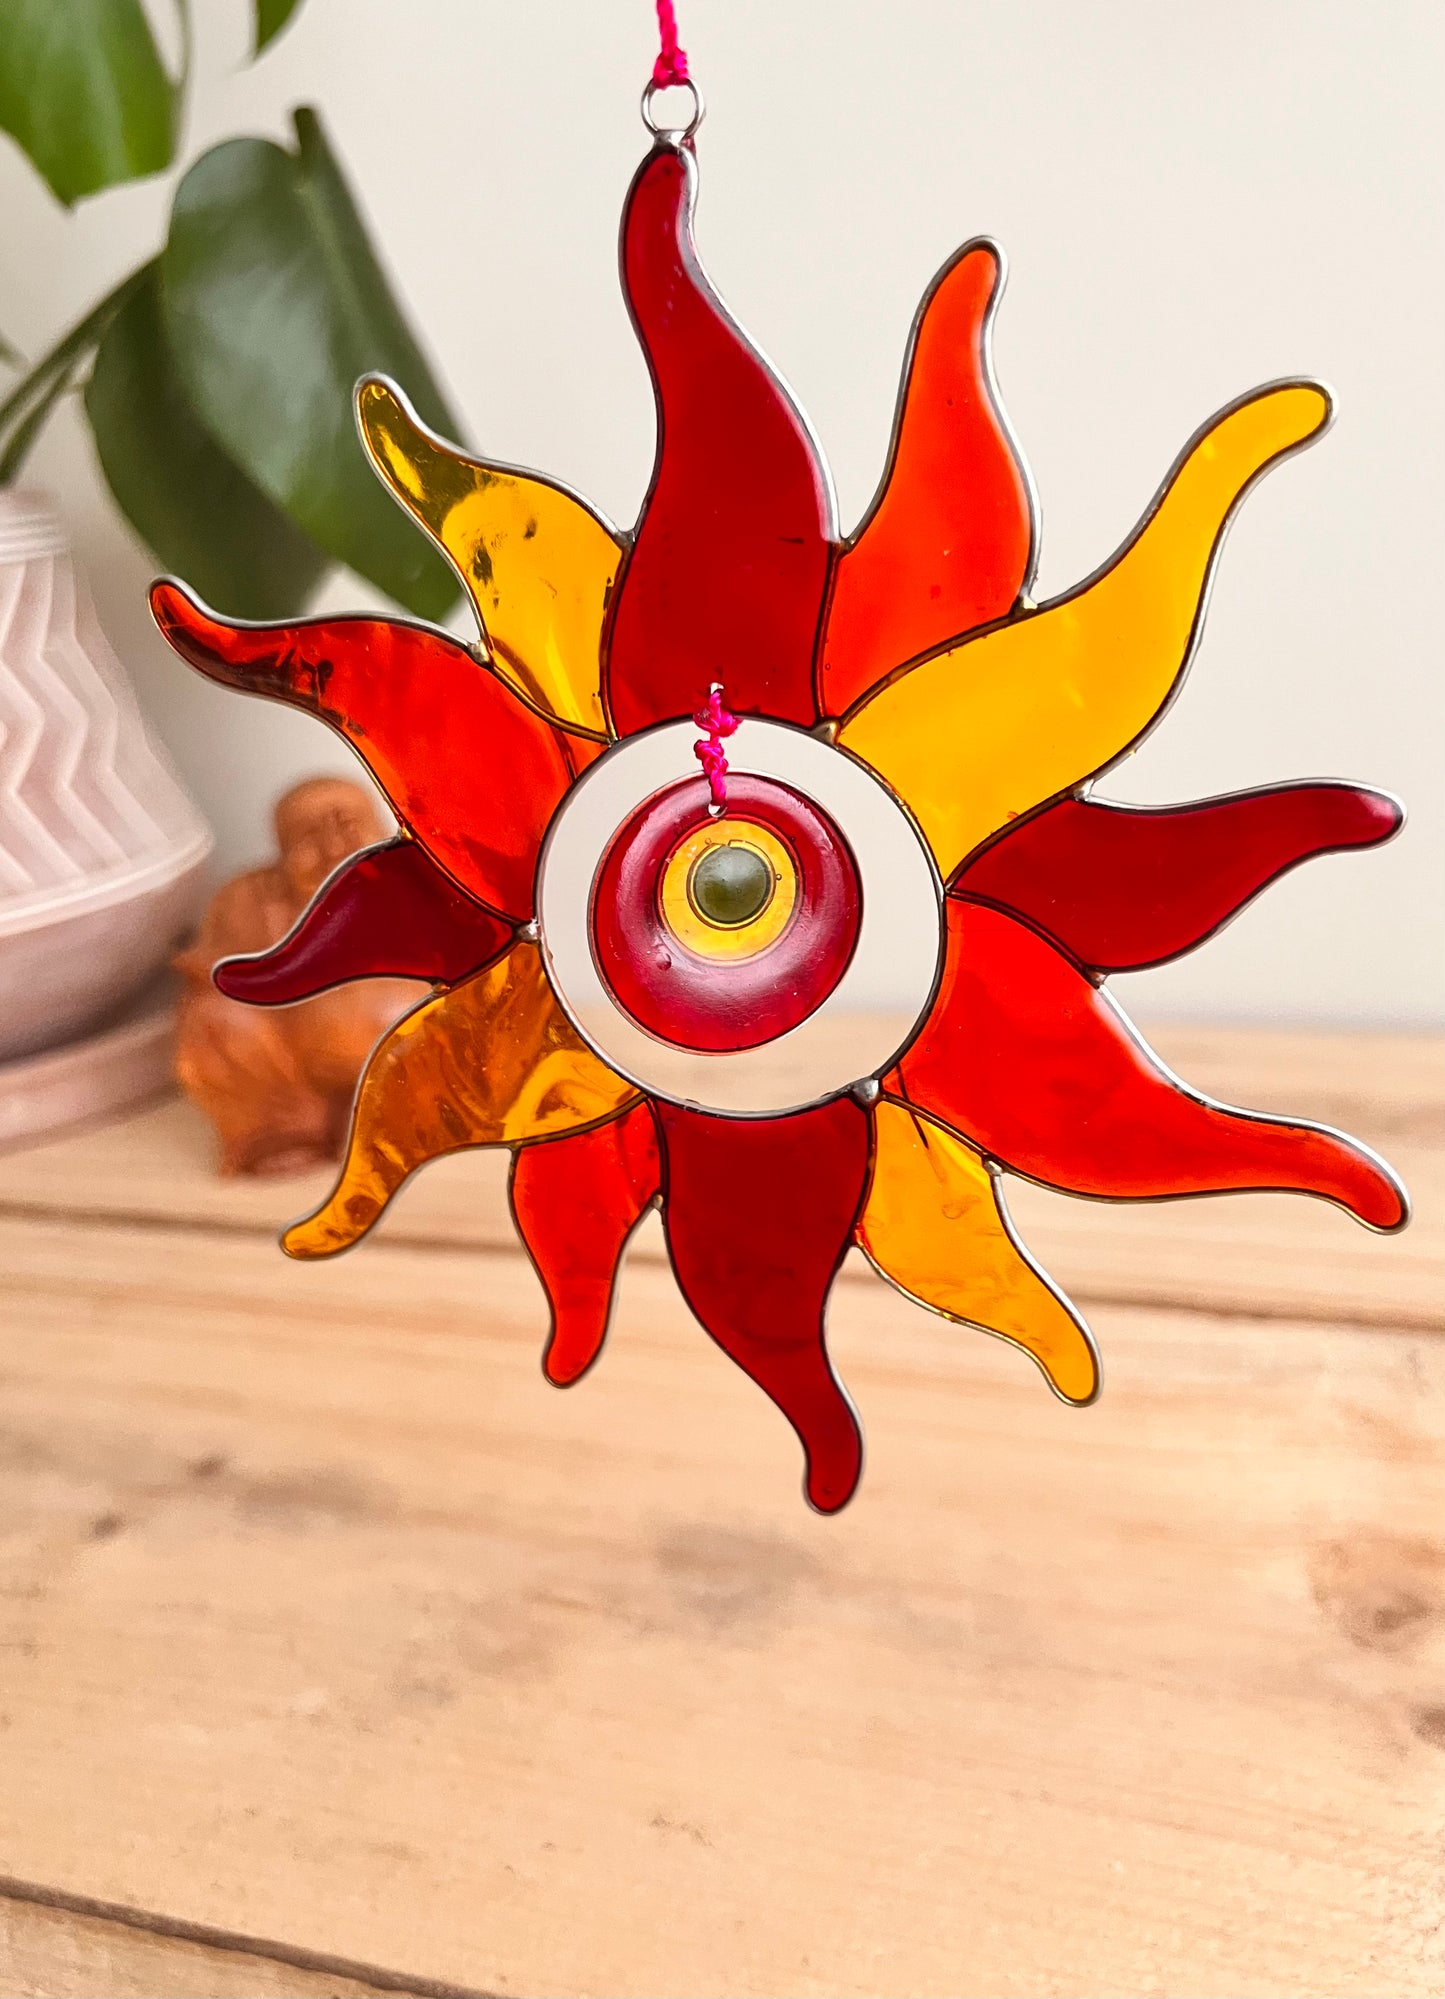 Stained glass sunshine sun catcher hanging decoration